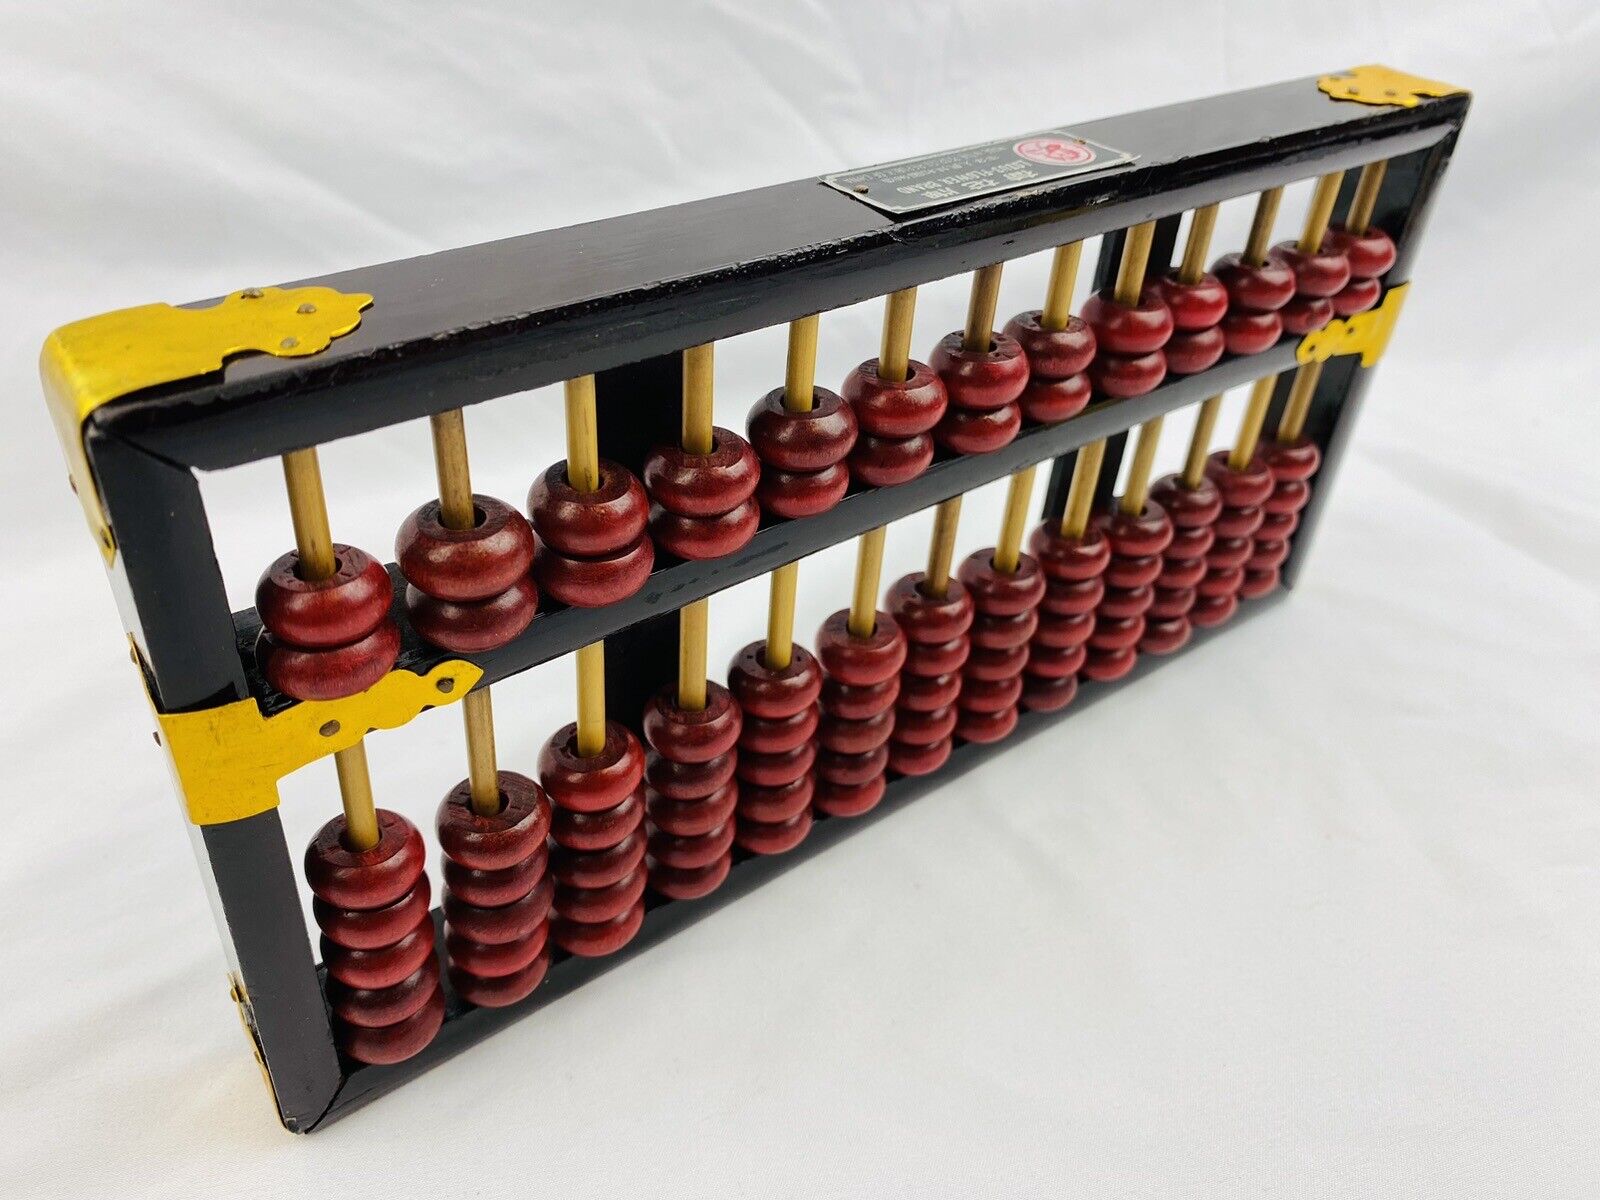 Vintage Chinese Wooden Abacus, Lotus-Flower Brand, 13 Rods 91 beads